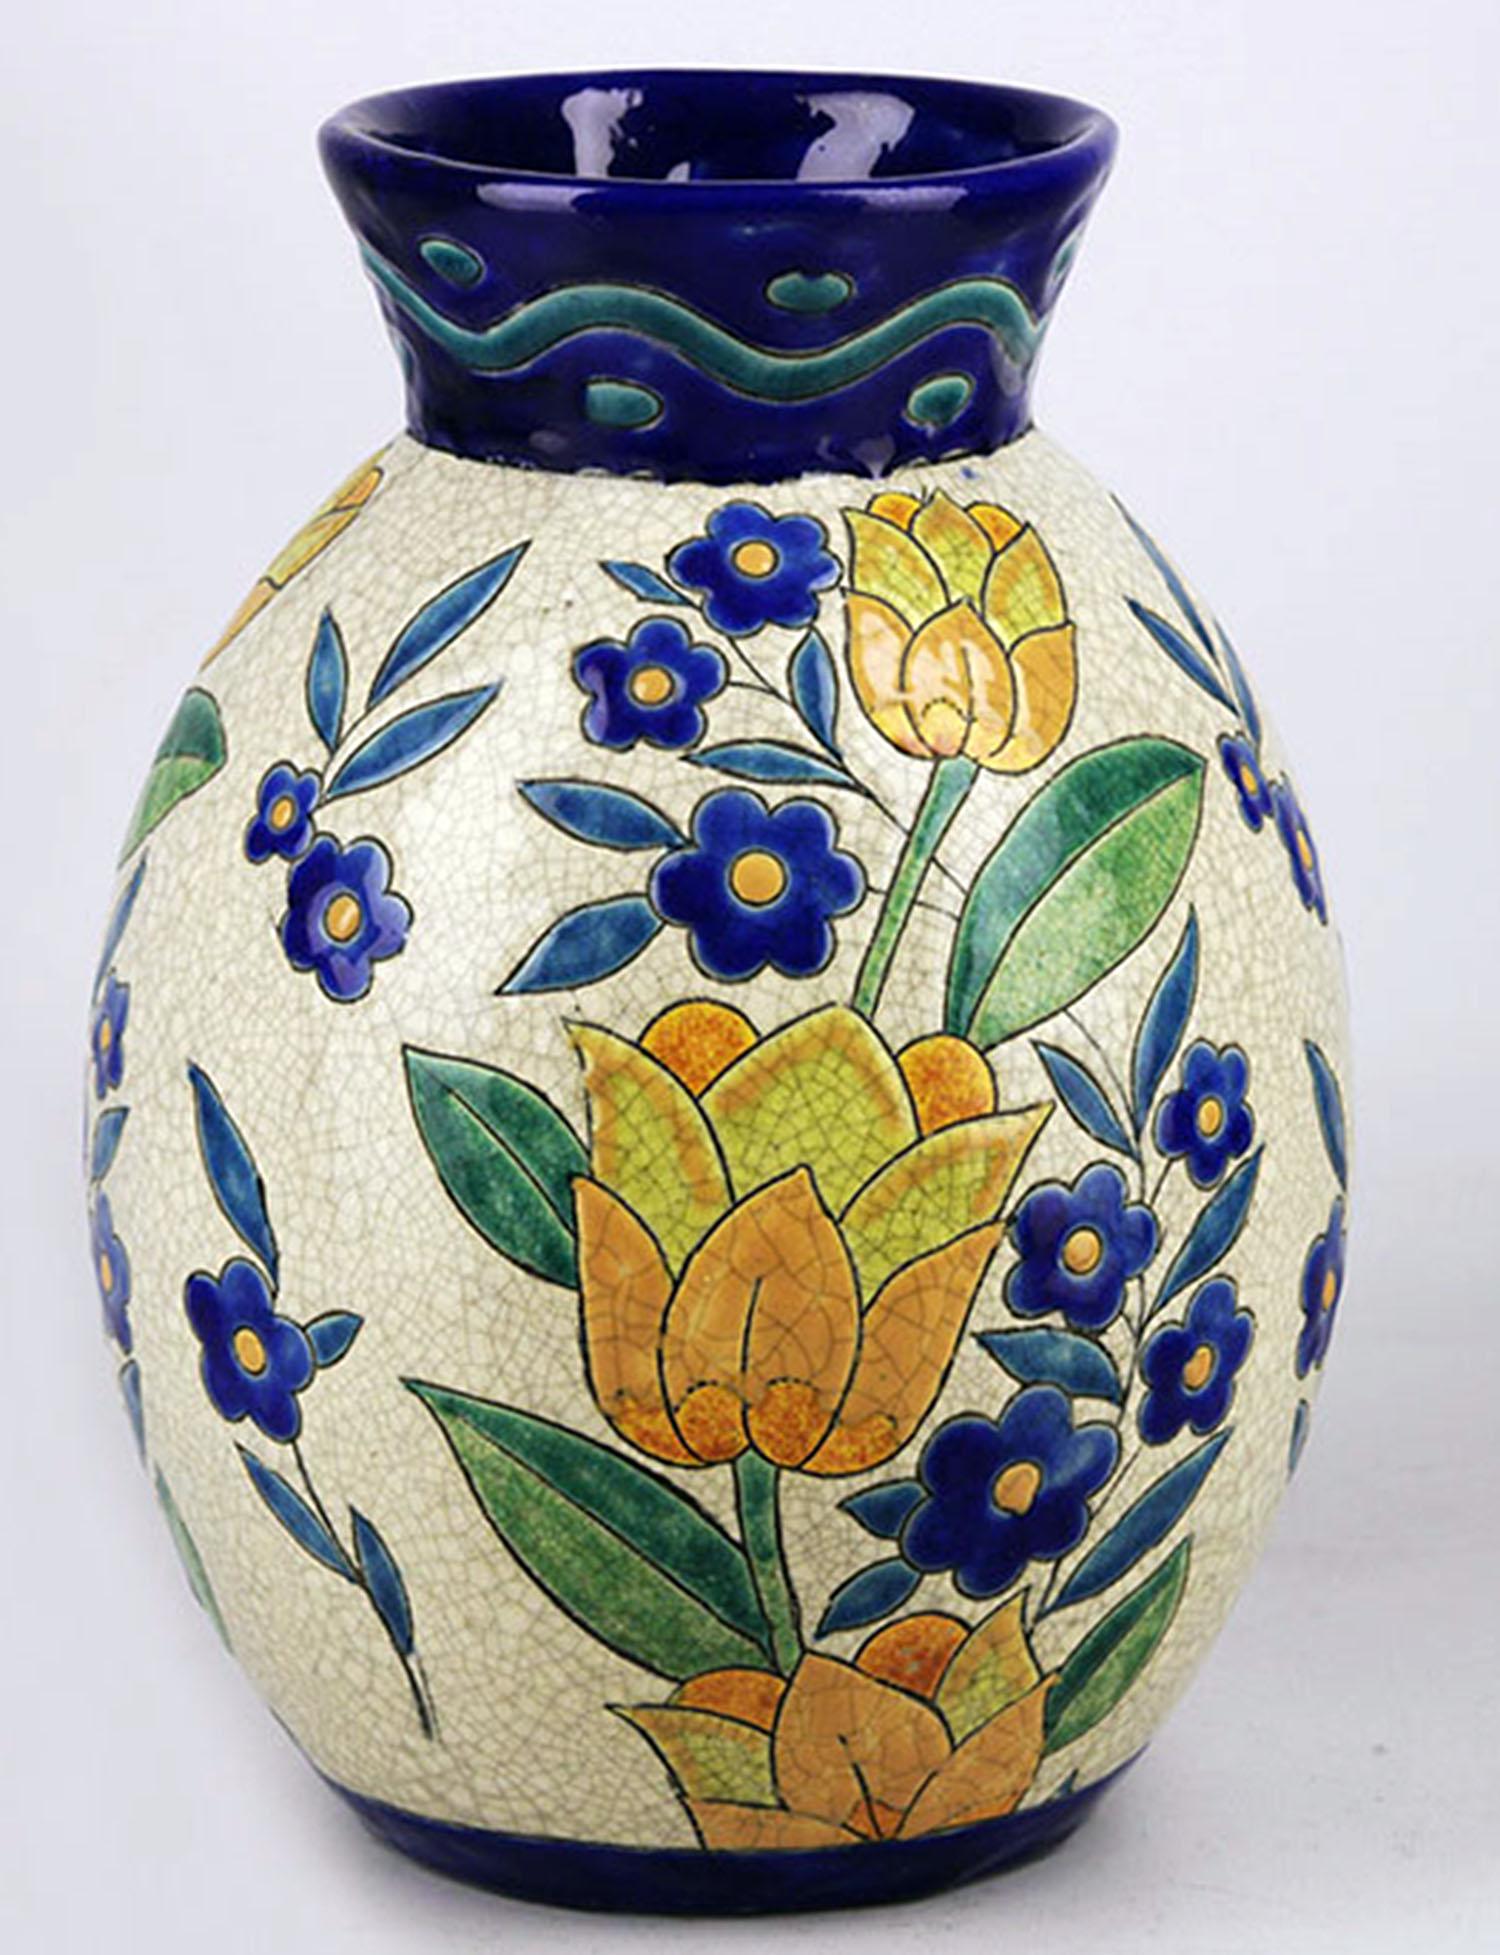 Art Déco belgian glazed pottery/ceramic Charles Catteau-like vase by Boch Freres Keramis

By: Boch Freres Keramis, Charles Catteau (in the style of)
Material: ceramic, pottery, paint, enamel
Technique: enameled, glazed, hand-crafted, hand-painted,